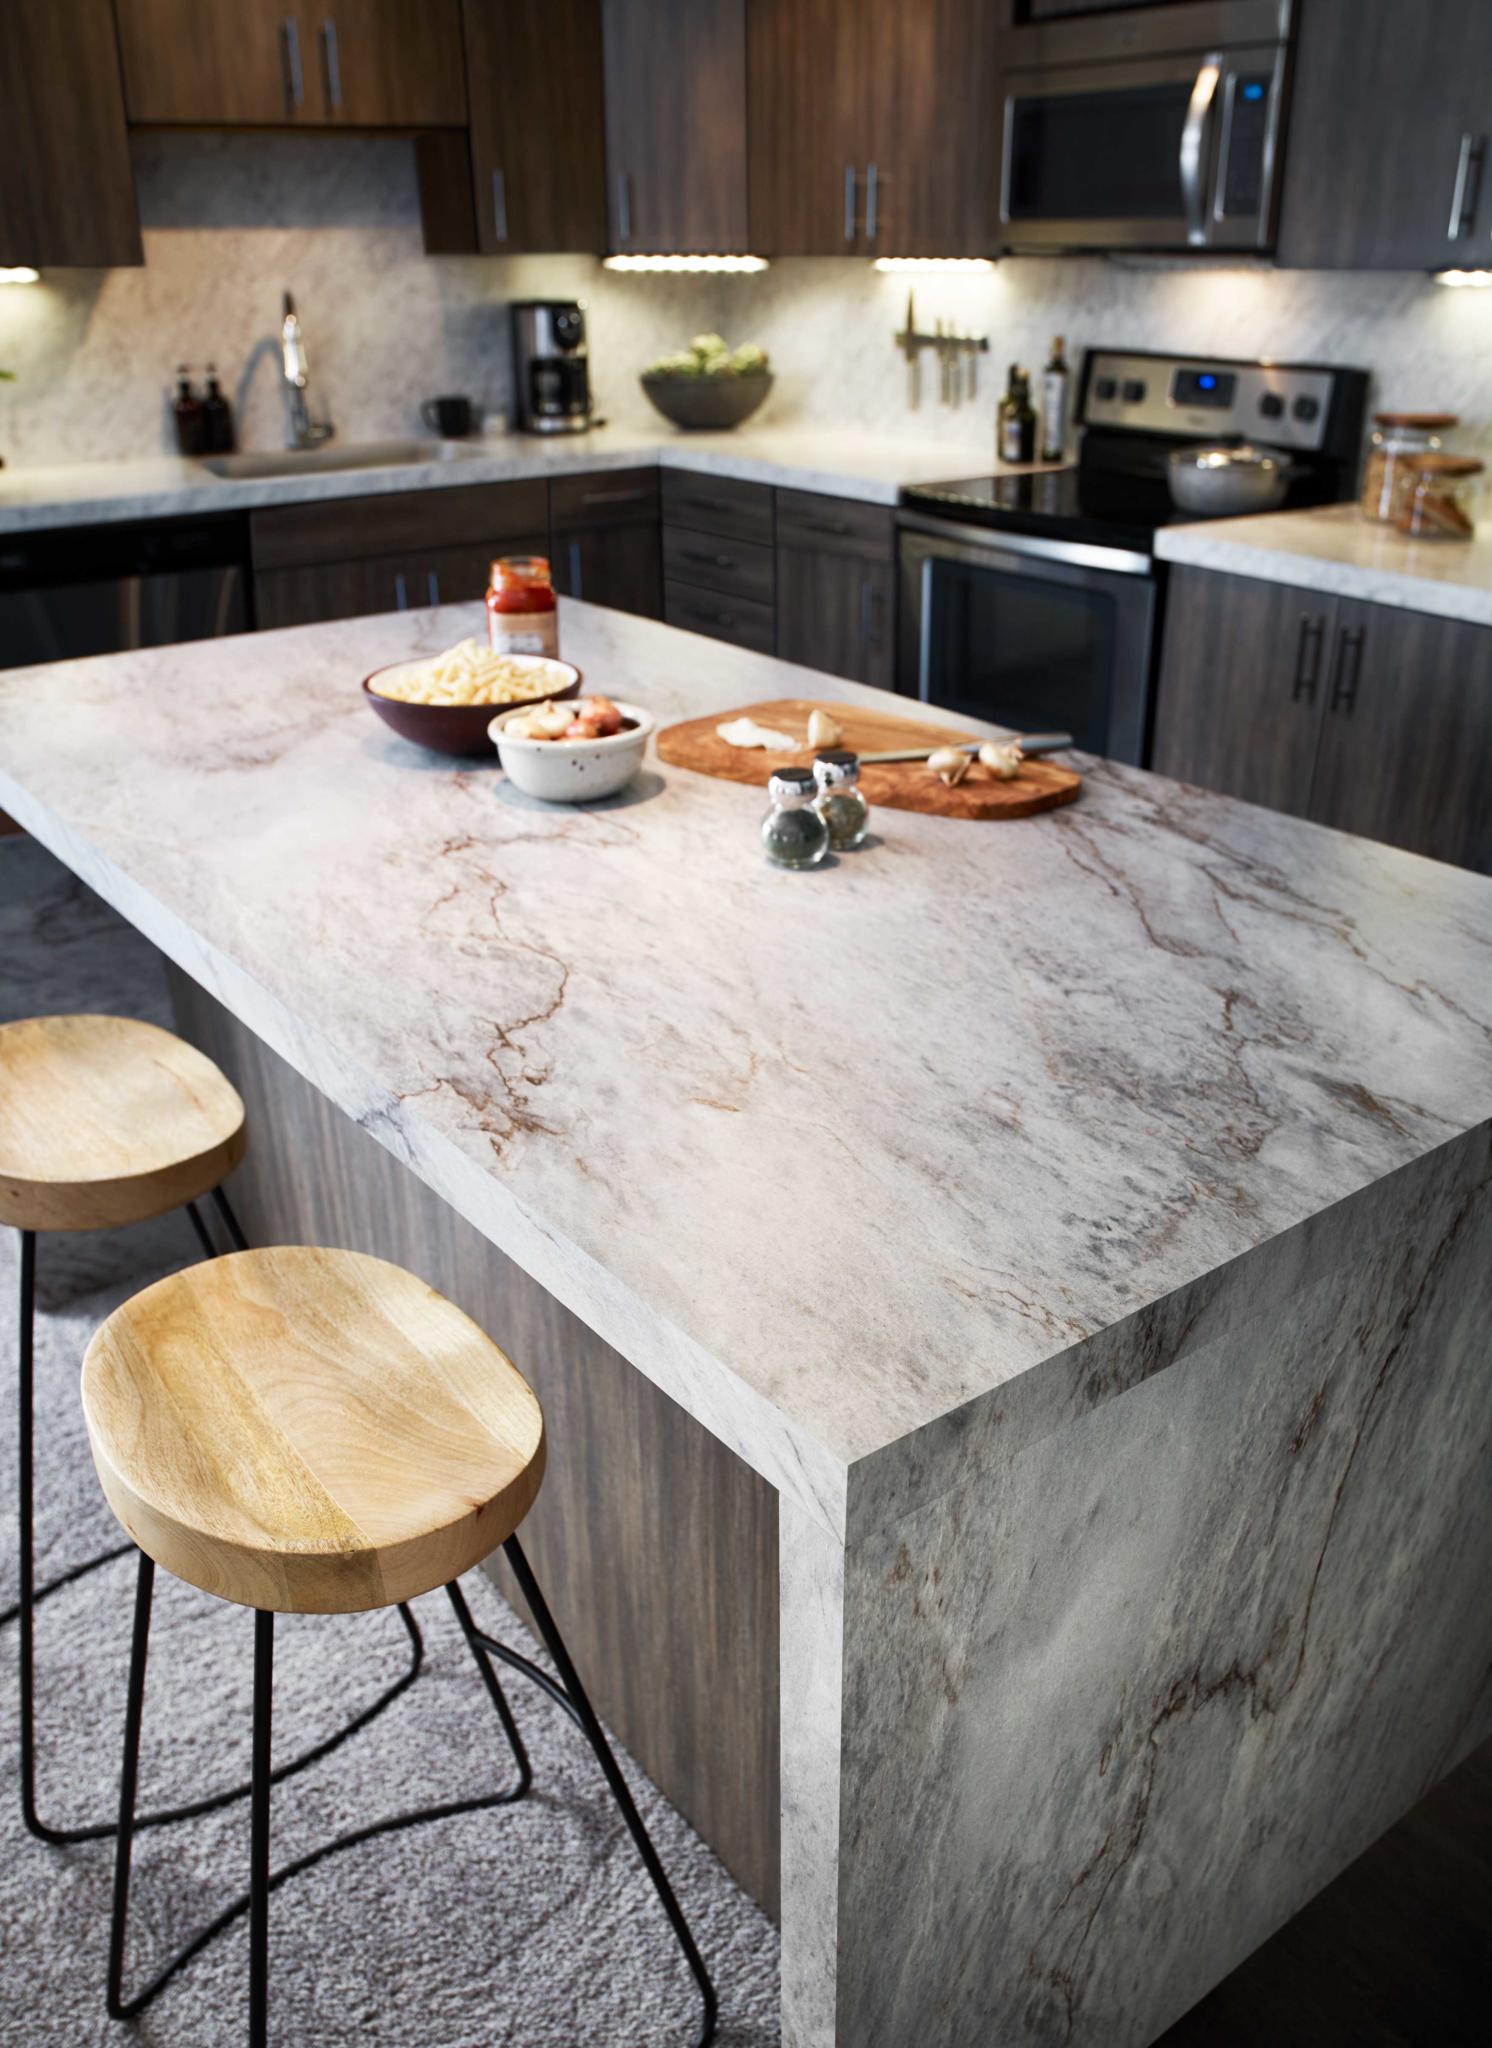 Get to know more about Laminate Countertop | FLOFORM Countertops